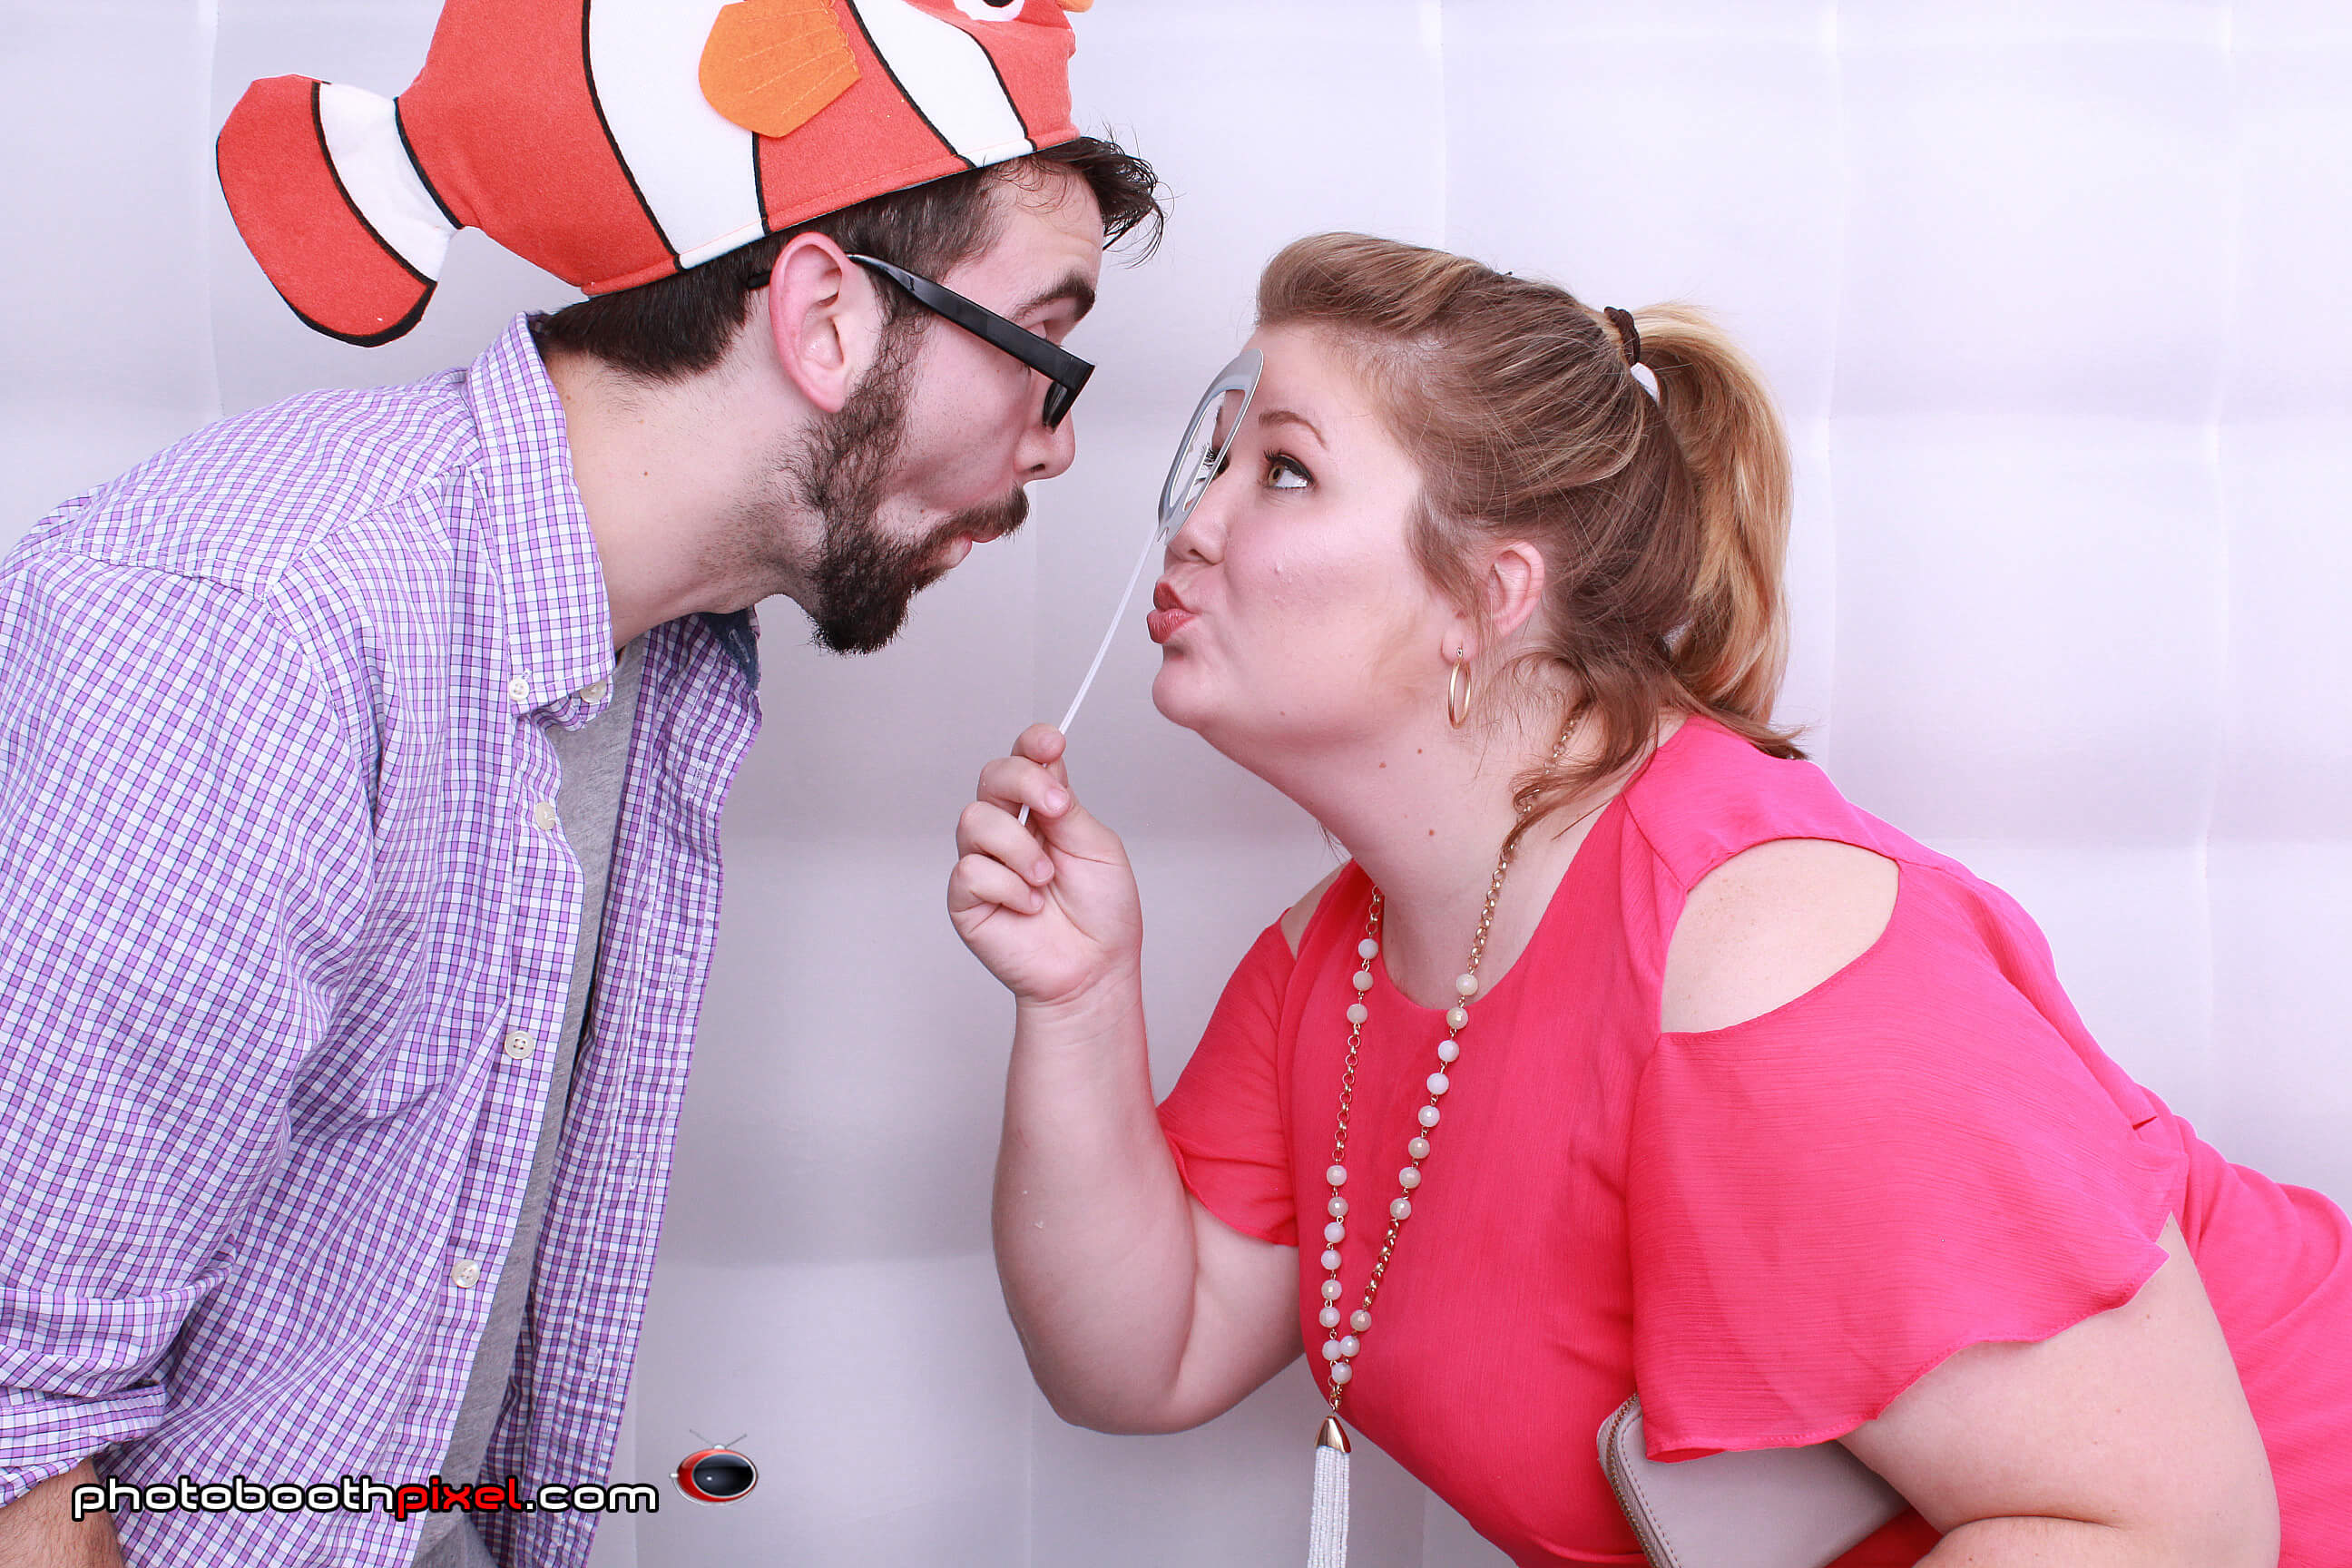 photo booth rental engine 15 brewing co downtown jacksonville